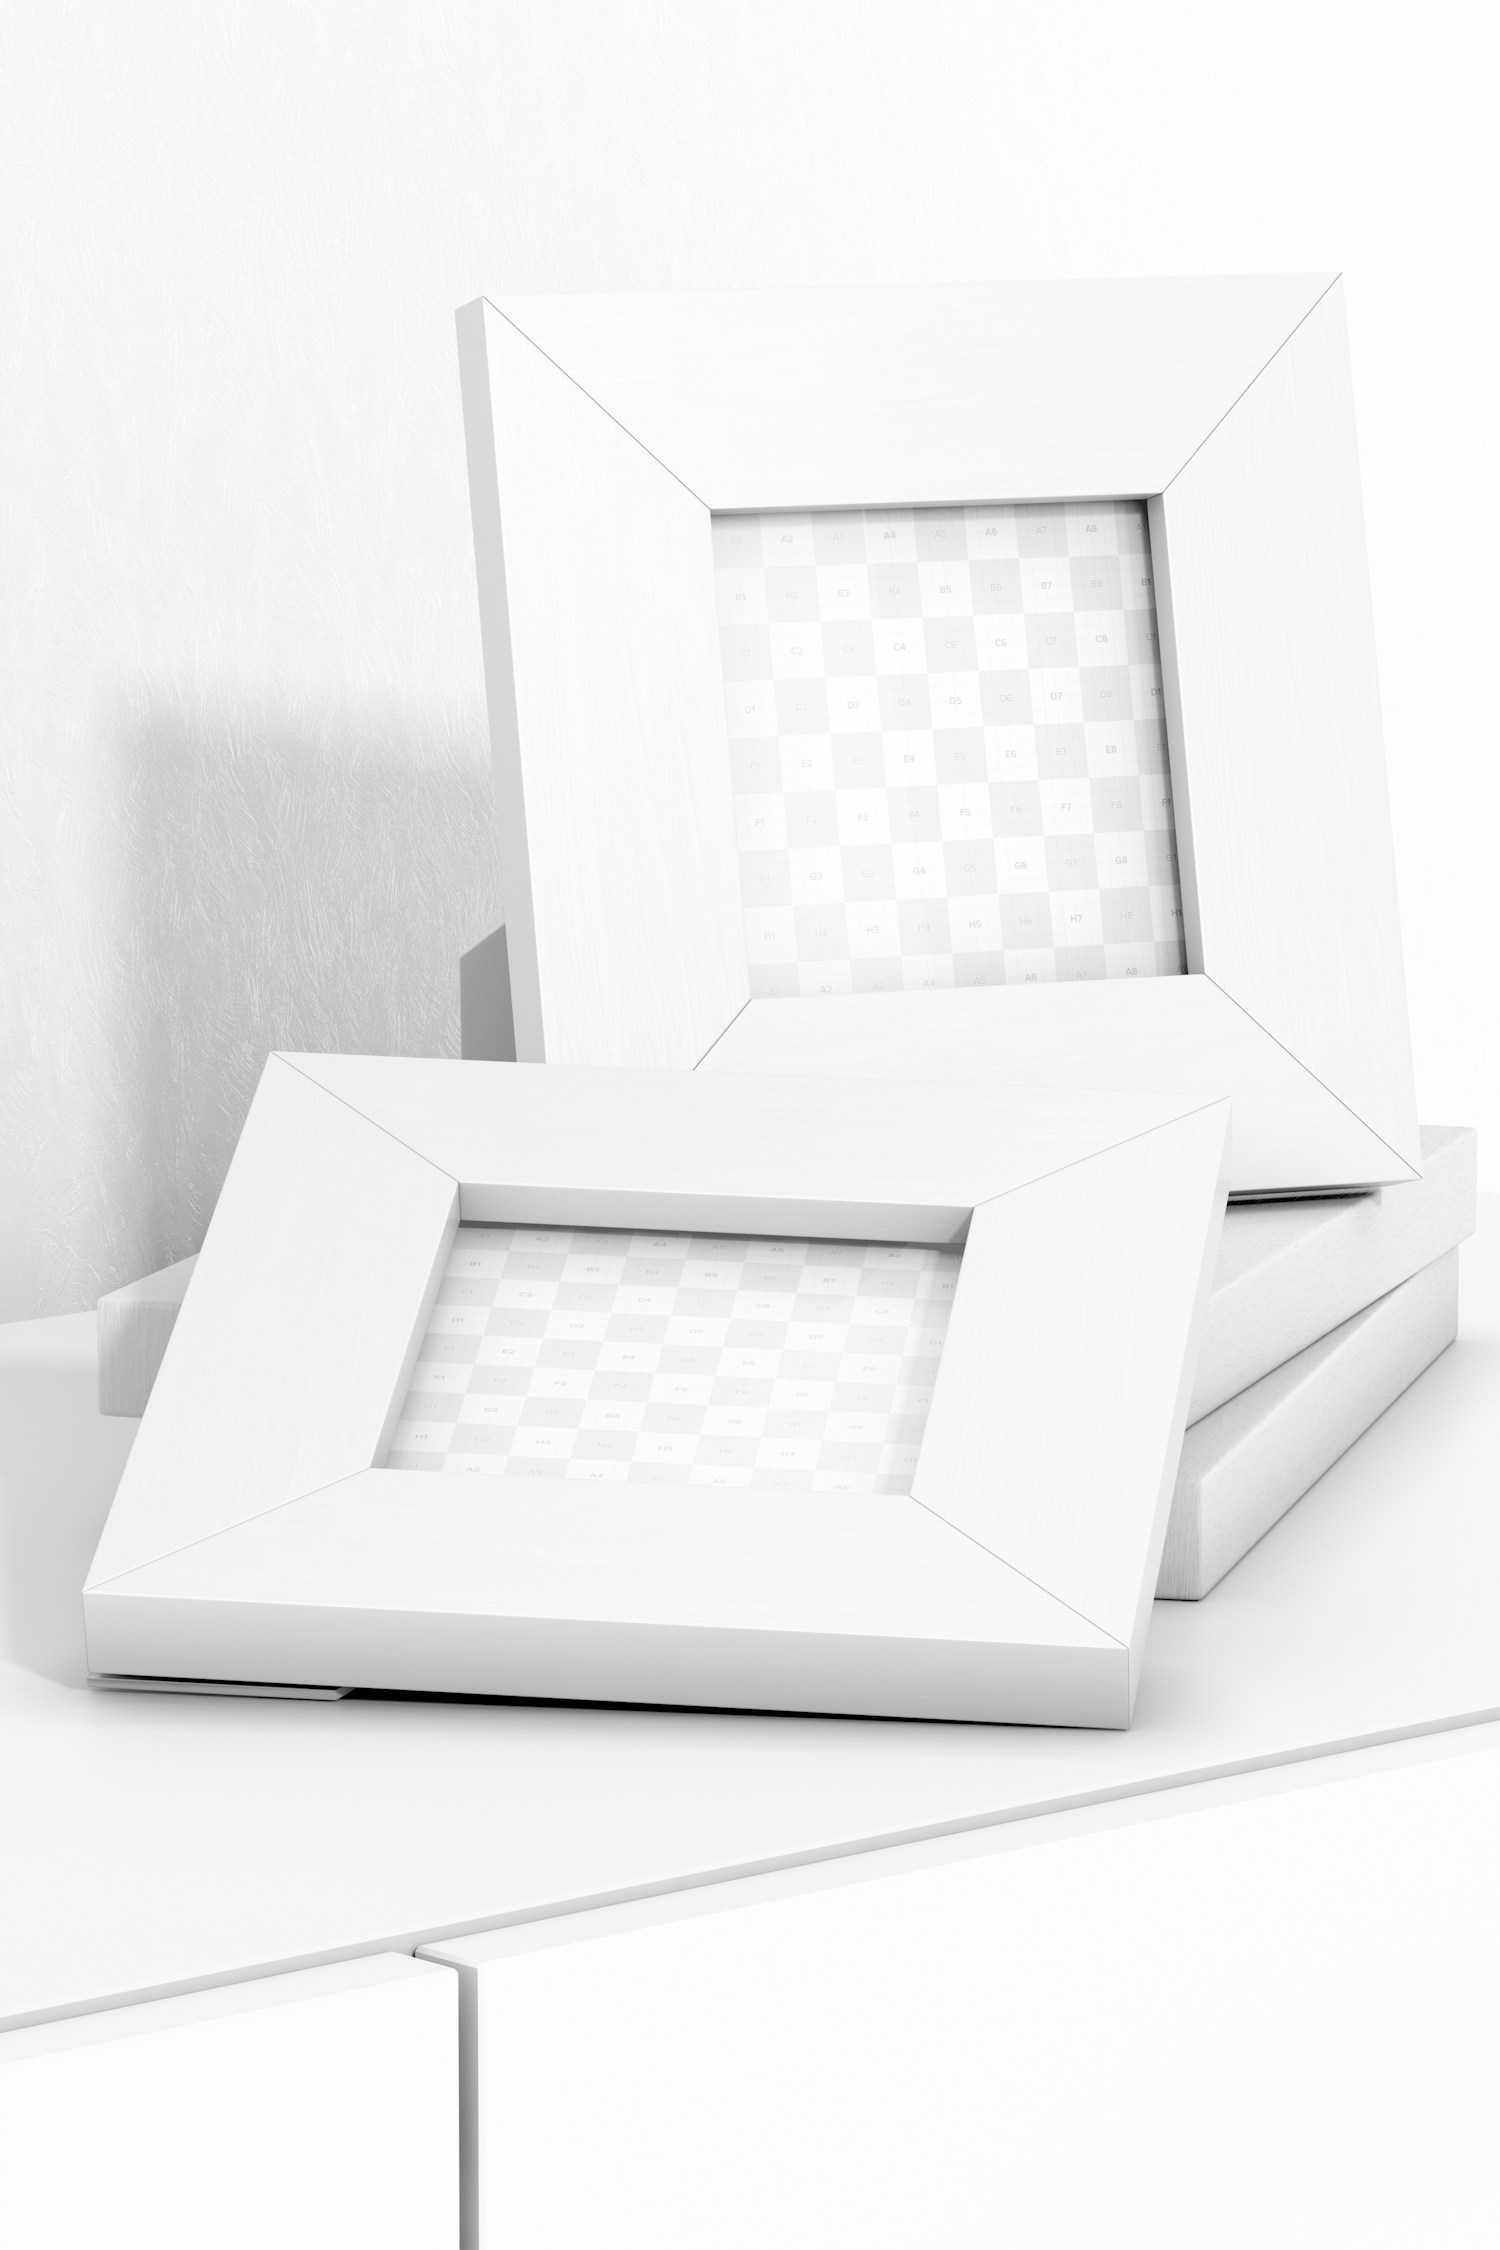 Square Photos Frame on Table Mockup